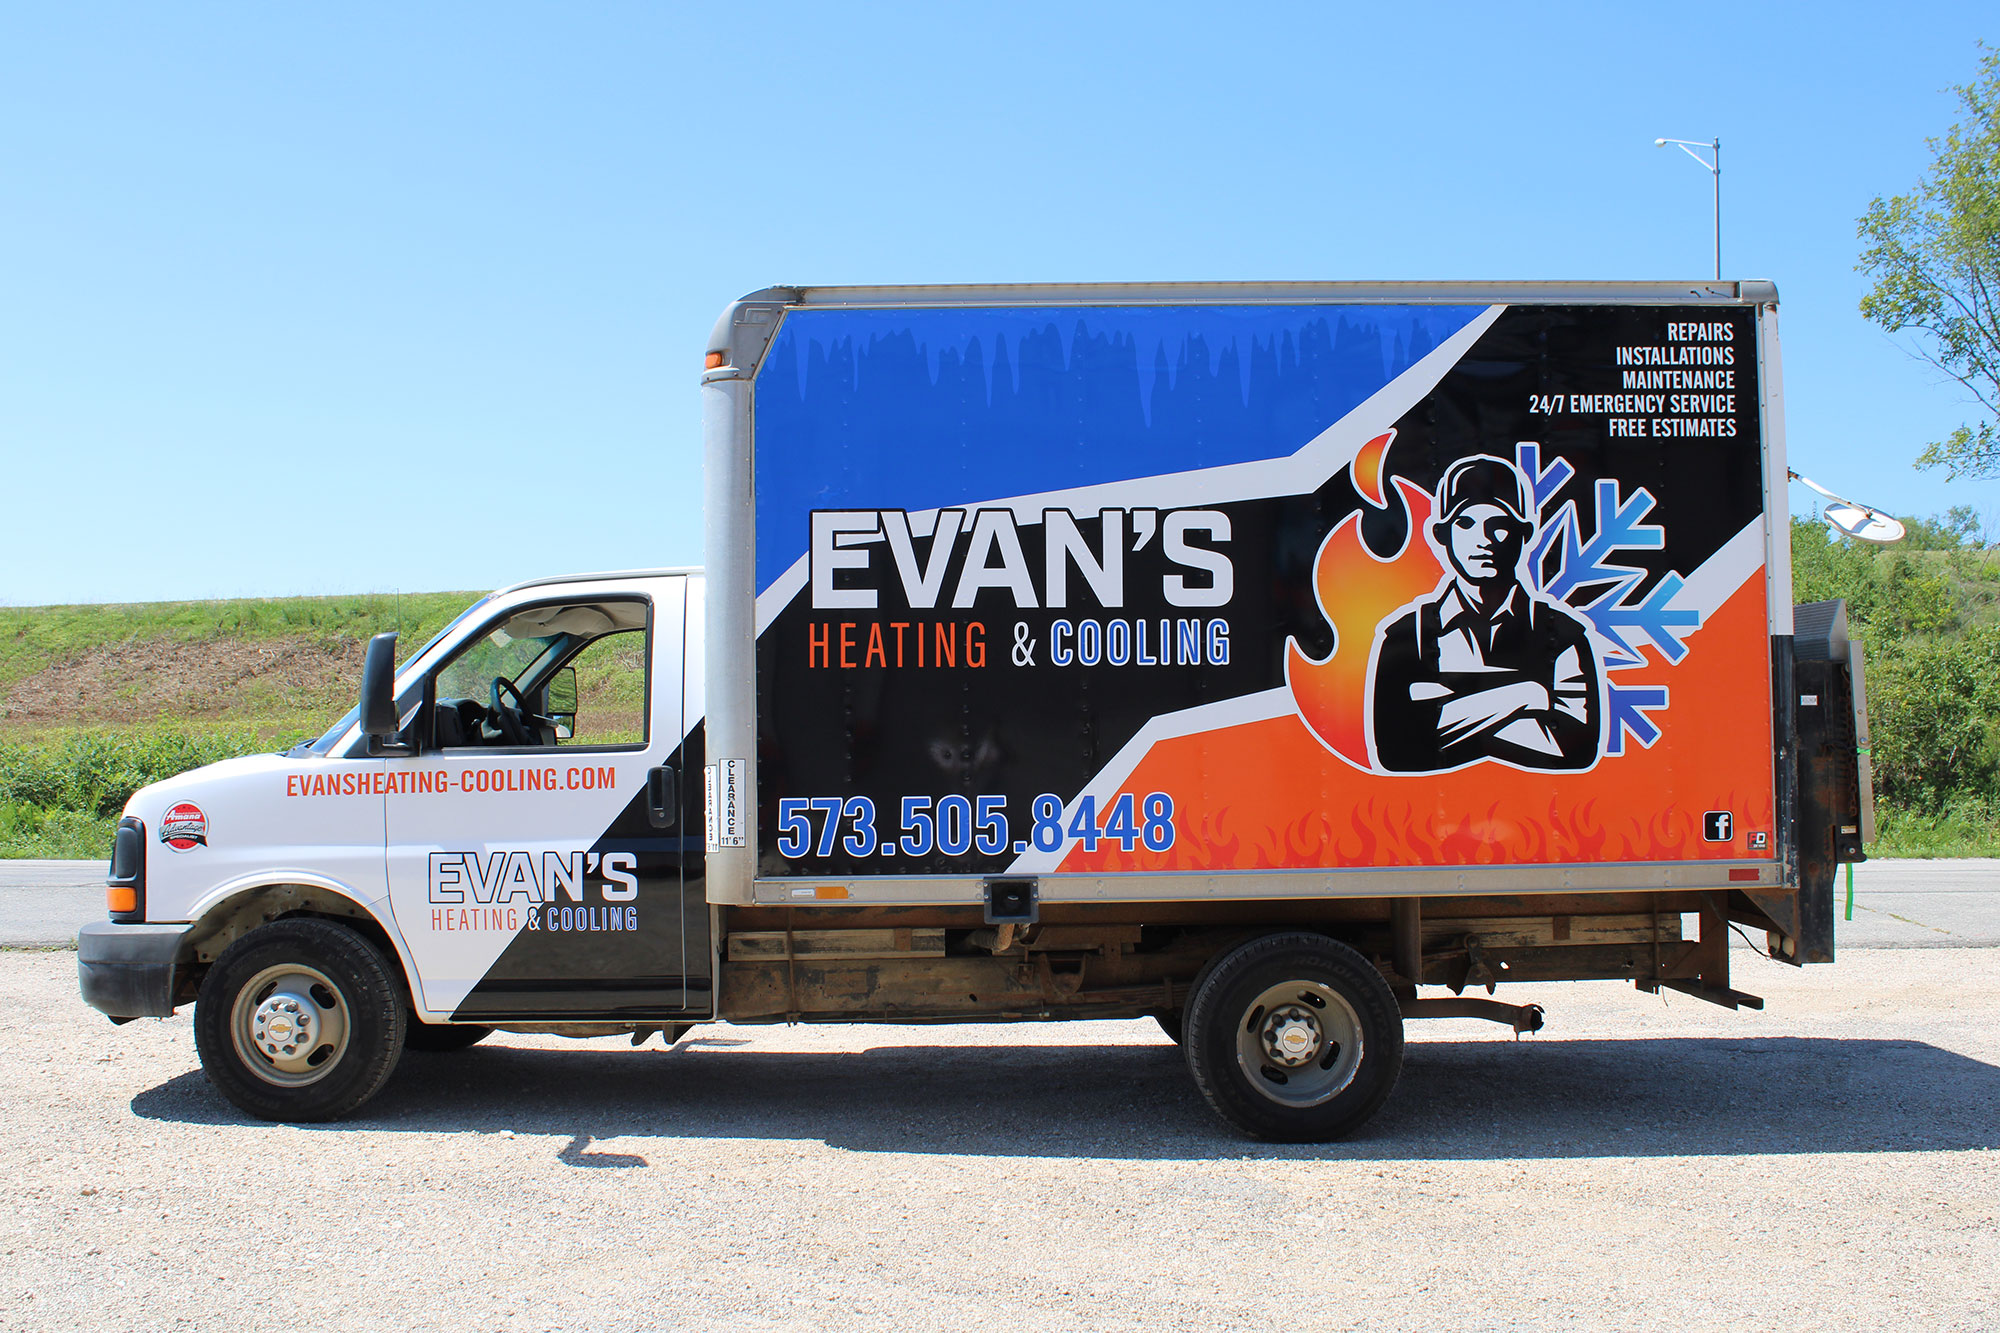 Evan Heating And Cooling Box Truck Vehicle Wrap Commercial Fleet 3m Wraps Certified Installers Columbia Mo